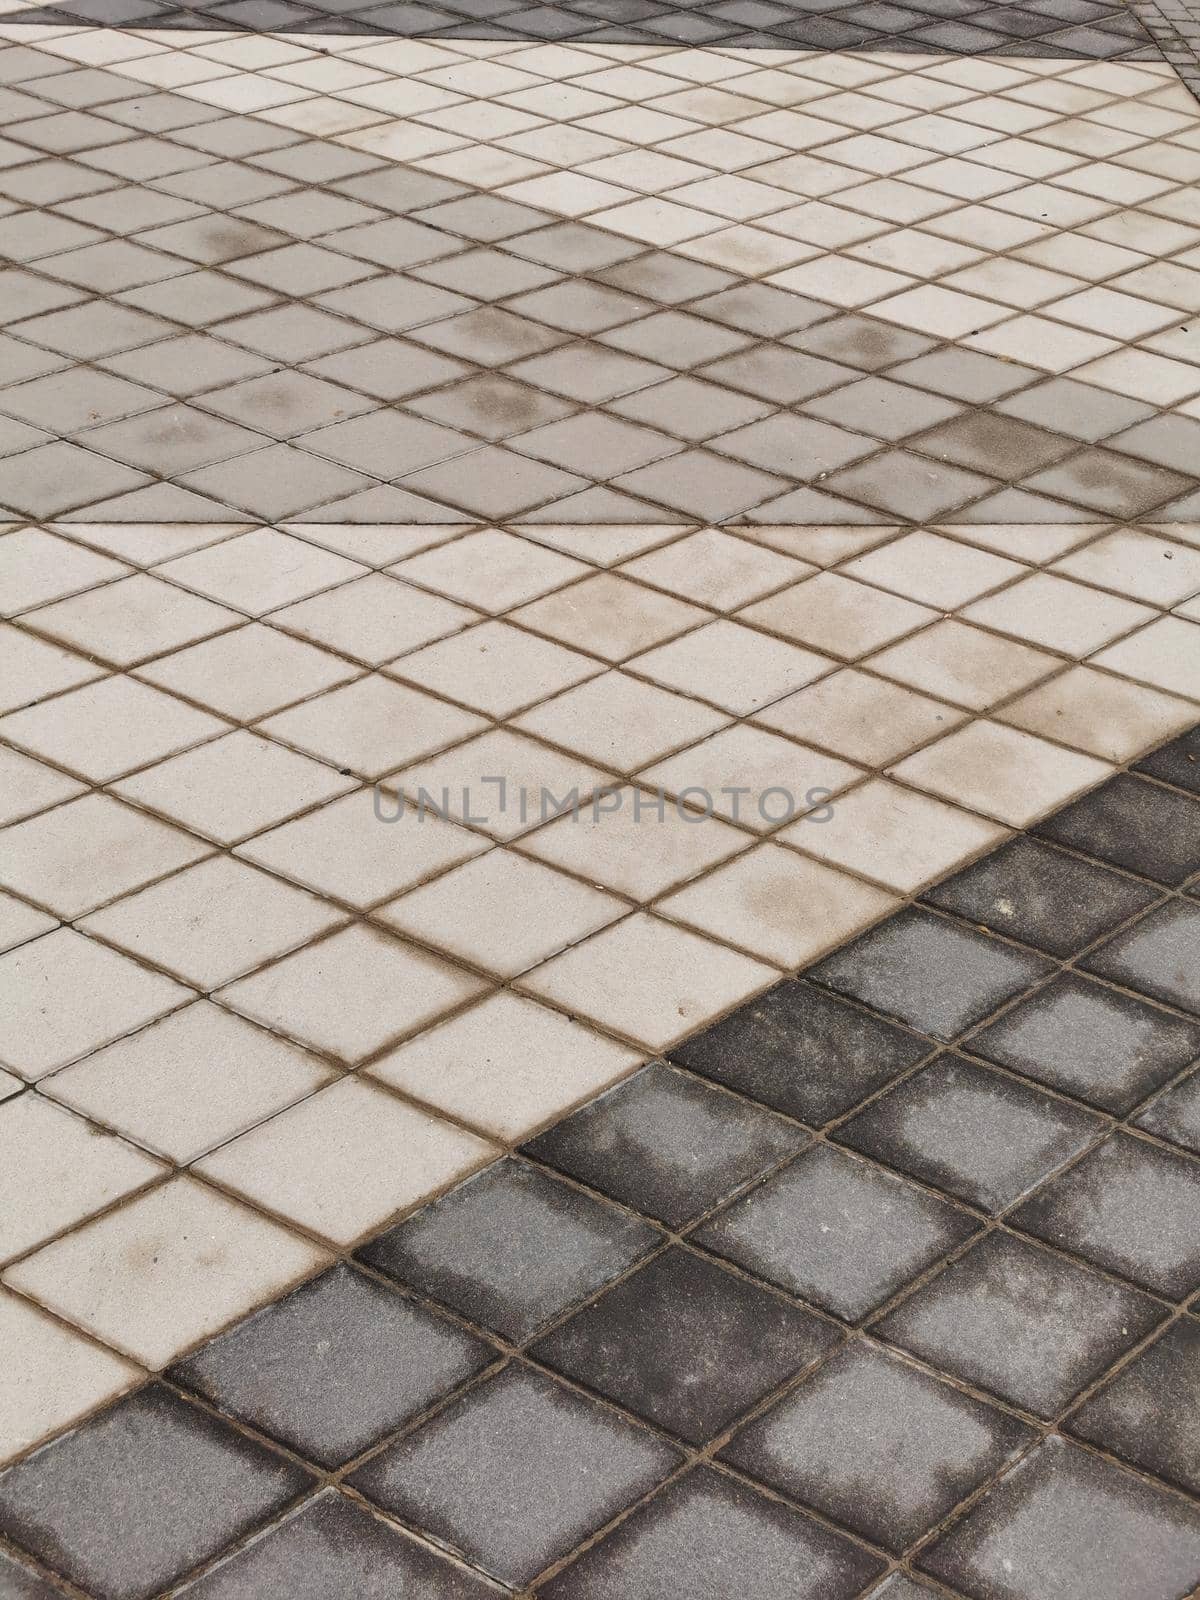 Floor tile mosaic of gray squares, construction by Andelov13